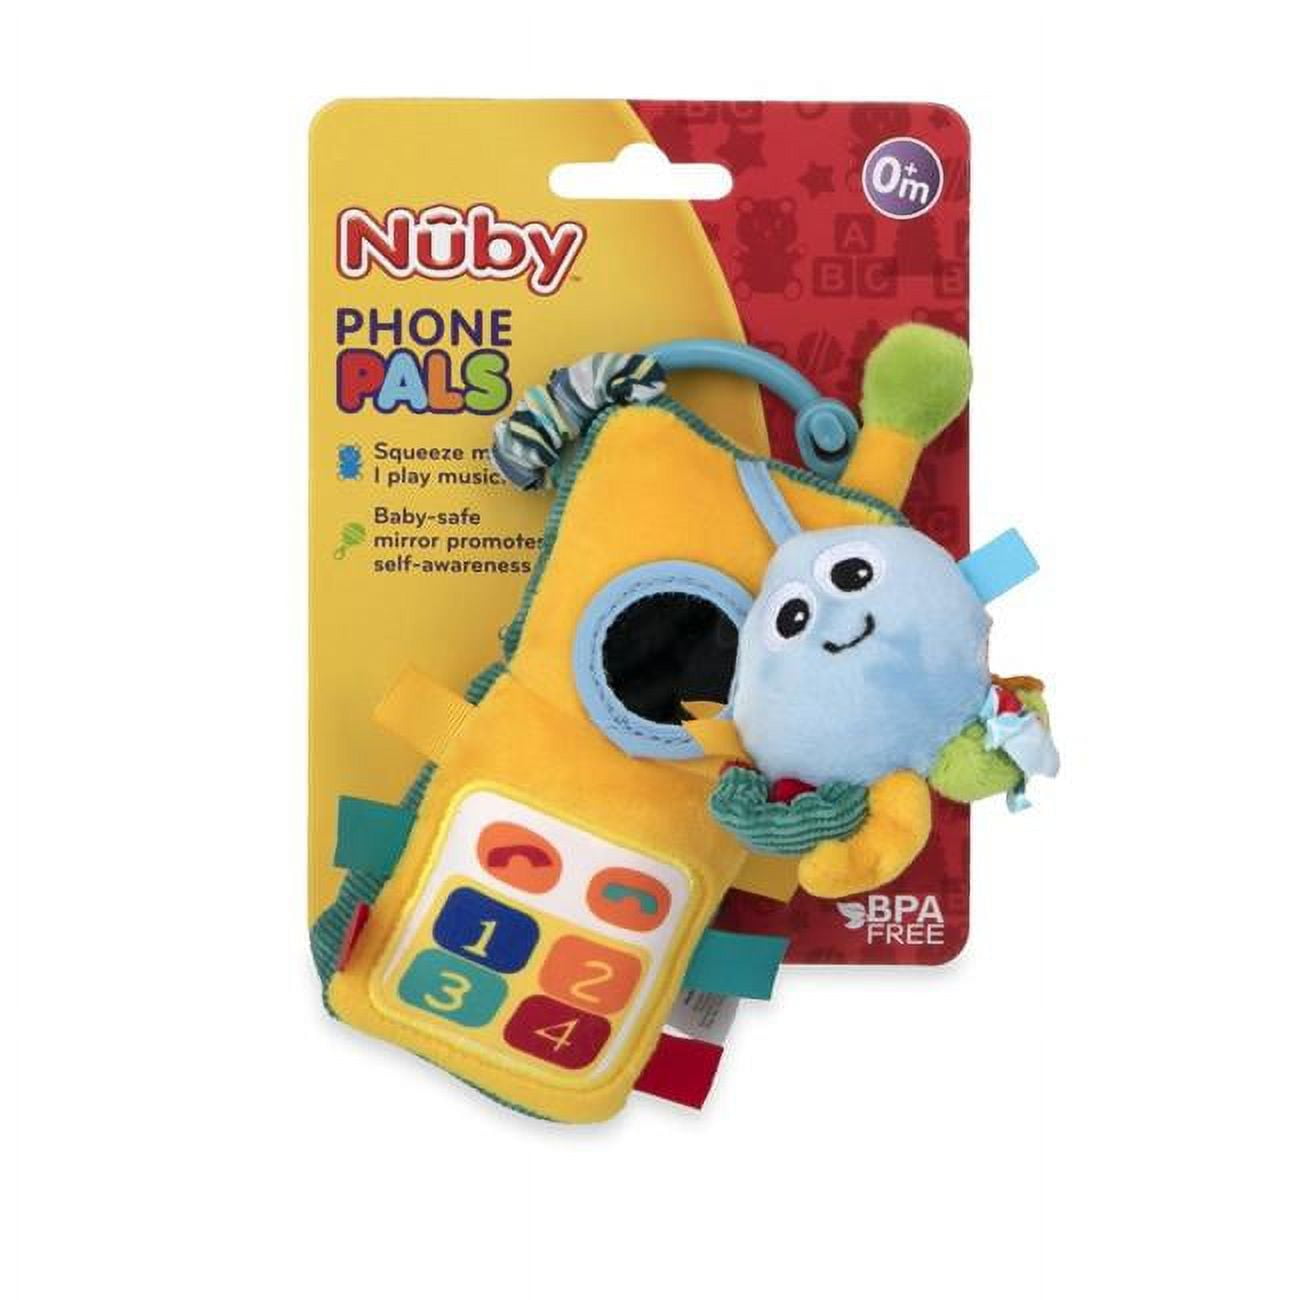 Picture of DDI 2360099 Nuby Plush Phone Pals Toys - Case of 48 - Pack of 48